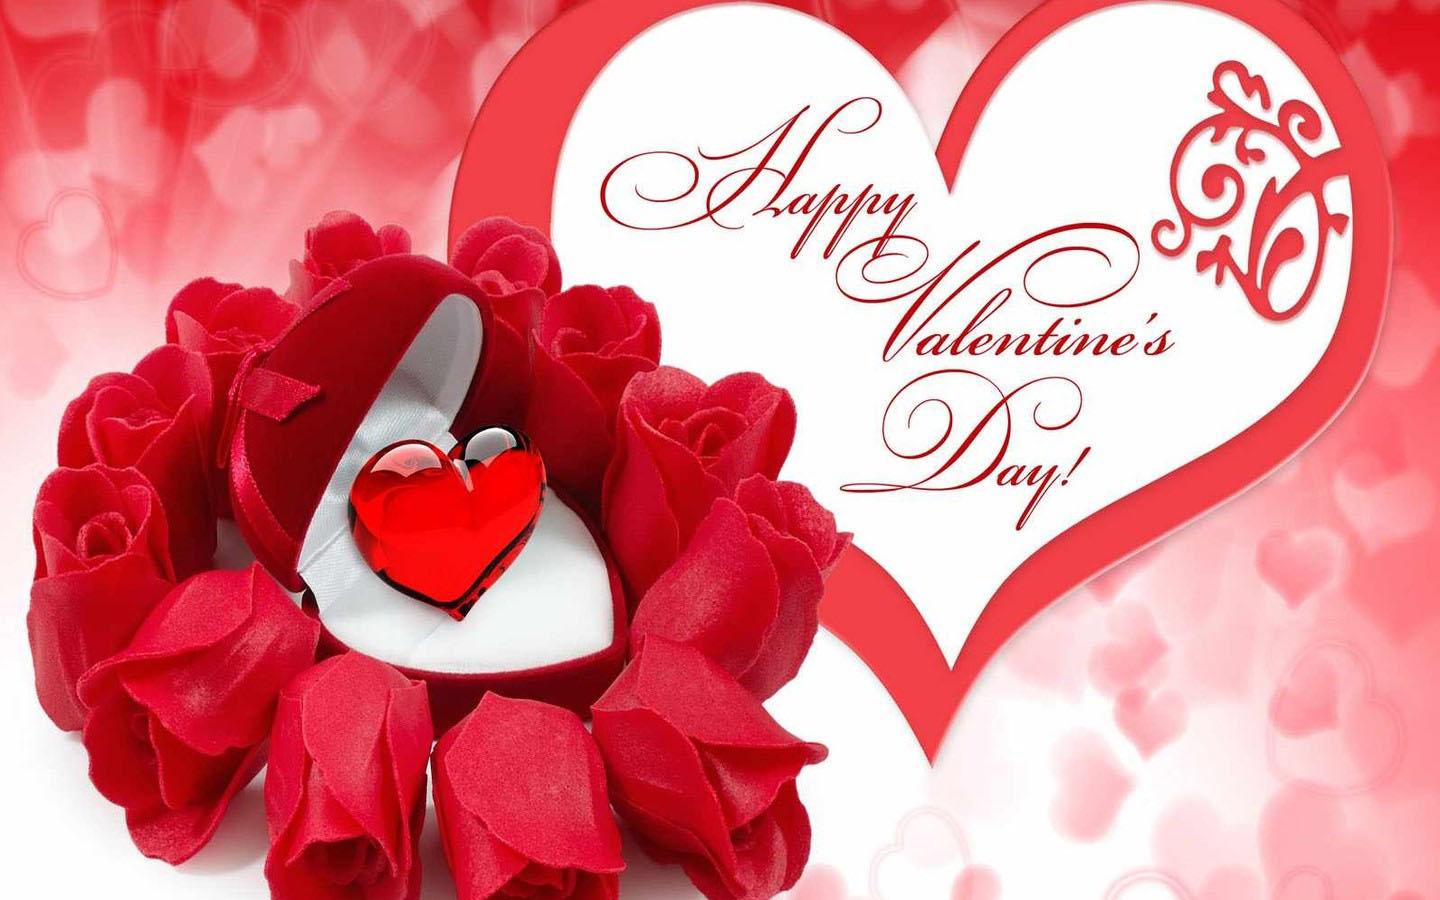 Valentine S Day Hd - Valentines Day Images Hd - HD Wallpaper 